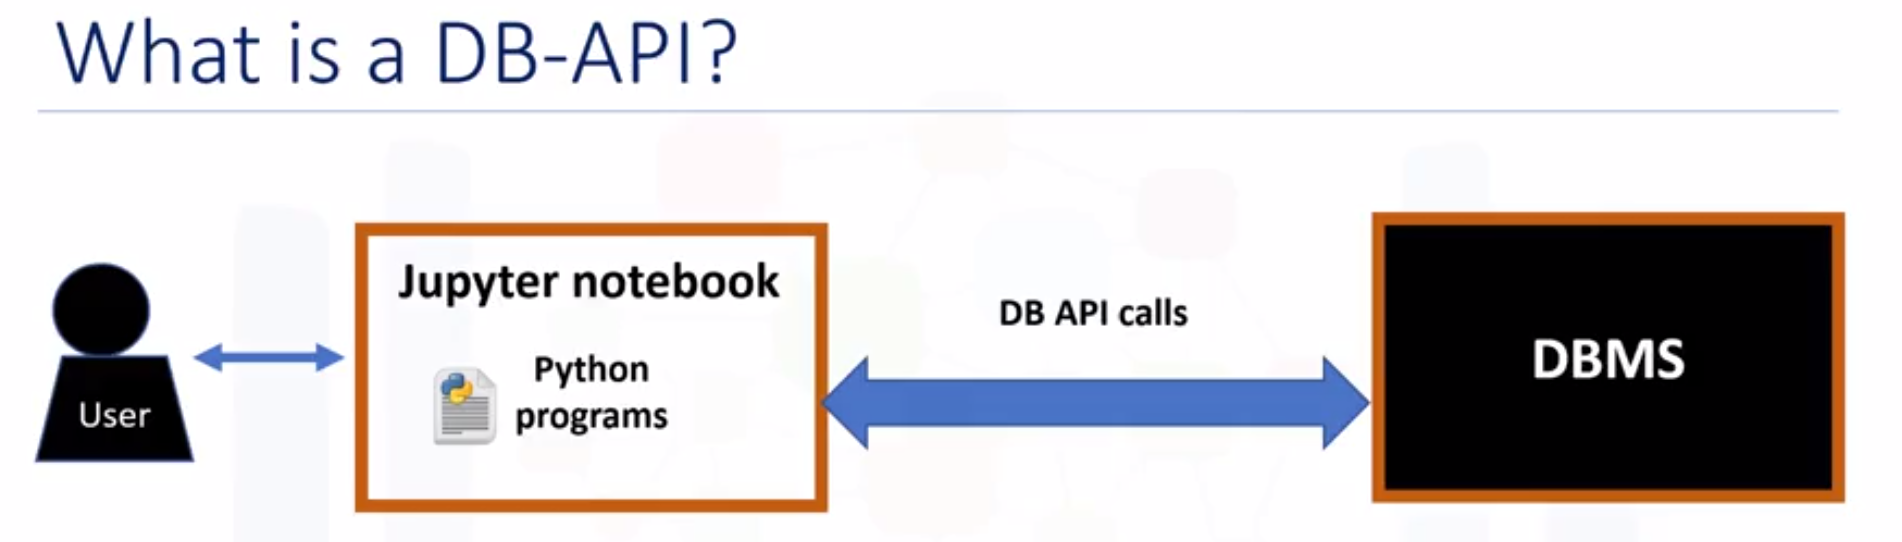 What is a DB-API